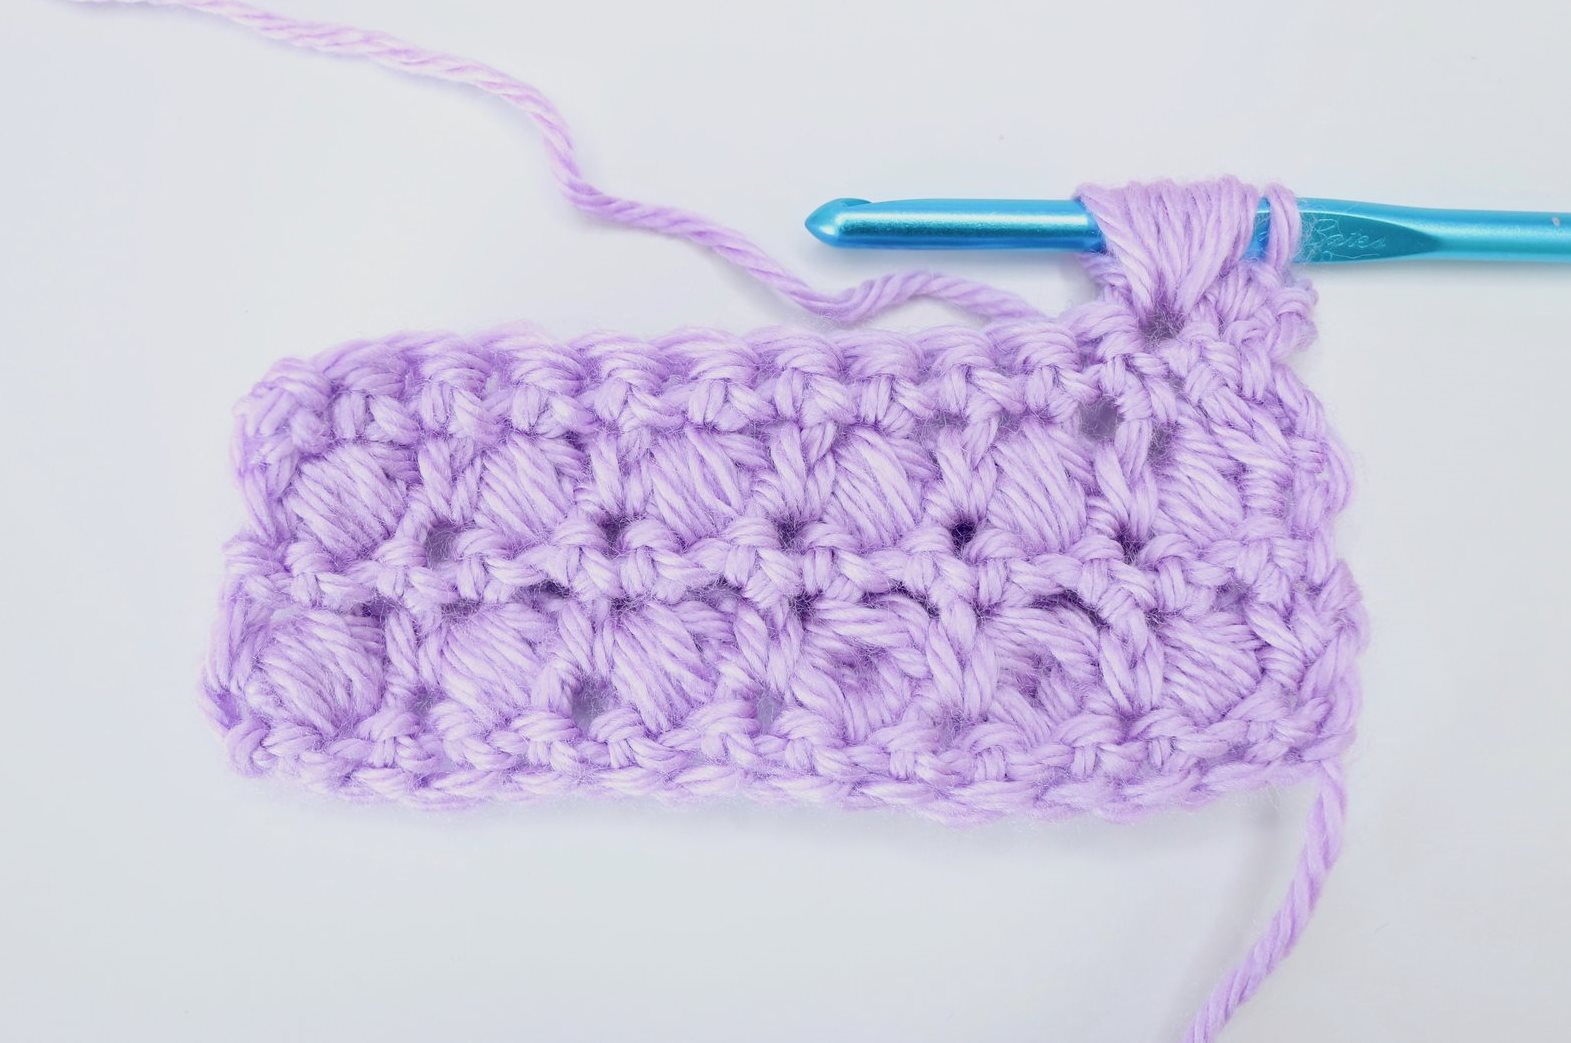 Popcorn Stitch - These different basic crochet stitches are the fundamentals to becoming an inventive crocheter. You could use these crochet stitches for blankets or a multitude of other projects. #SingleCrochetStitch #TunisianCrochet #BasicCrrochetStitches